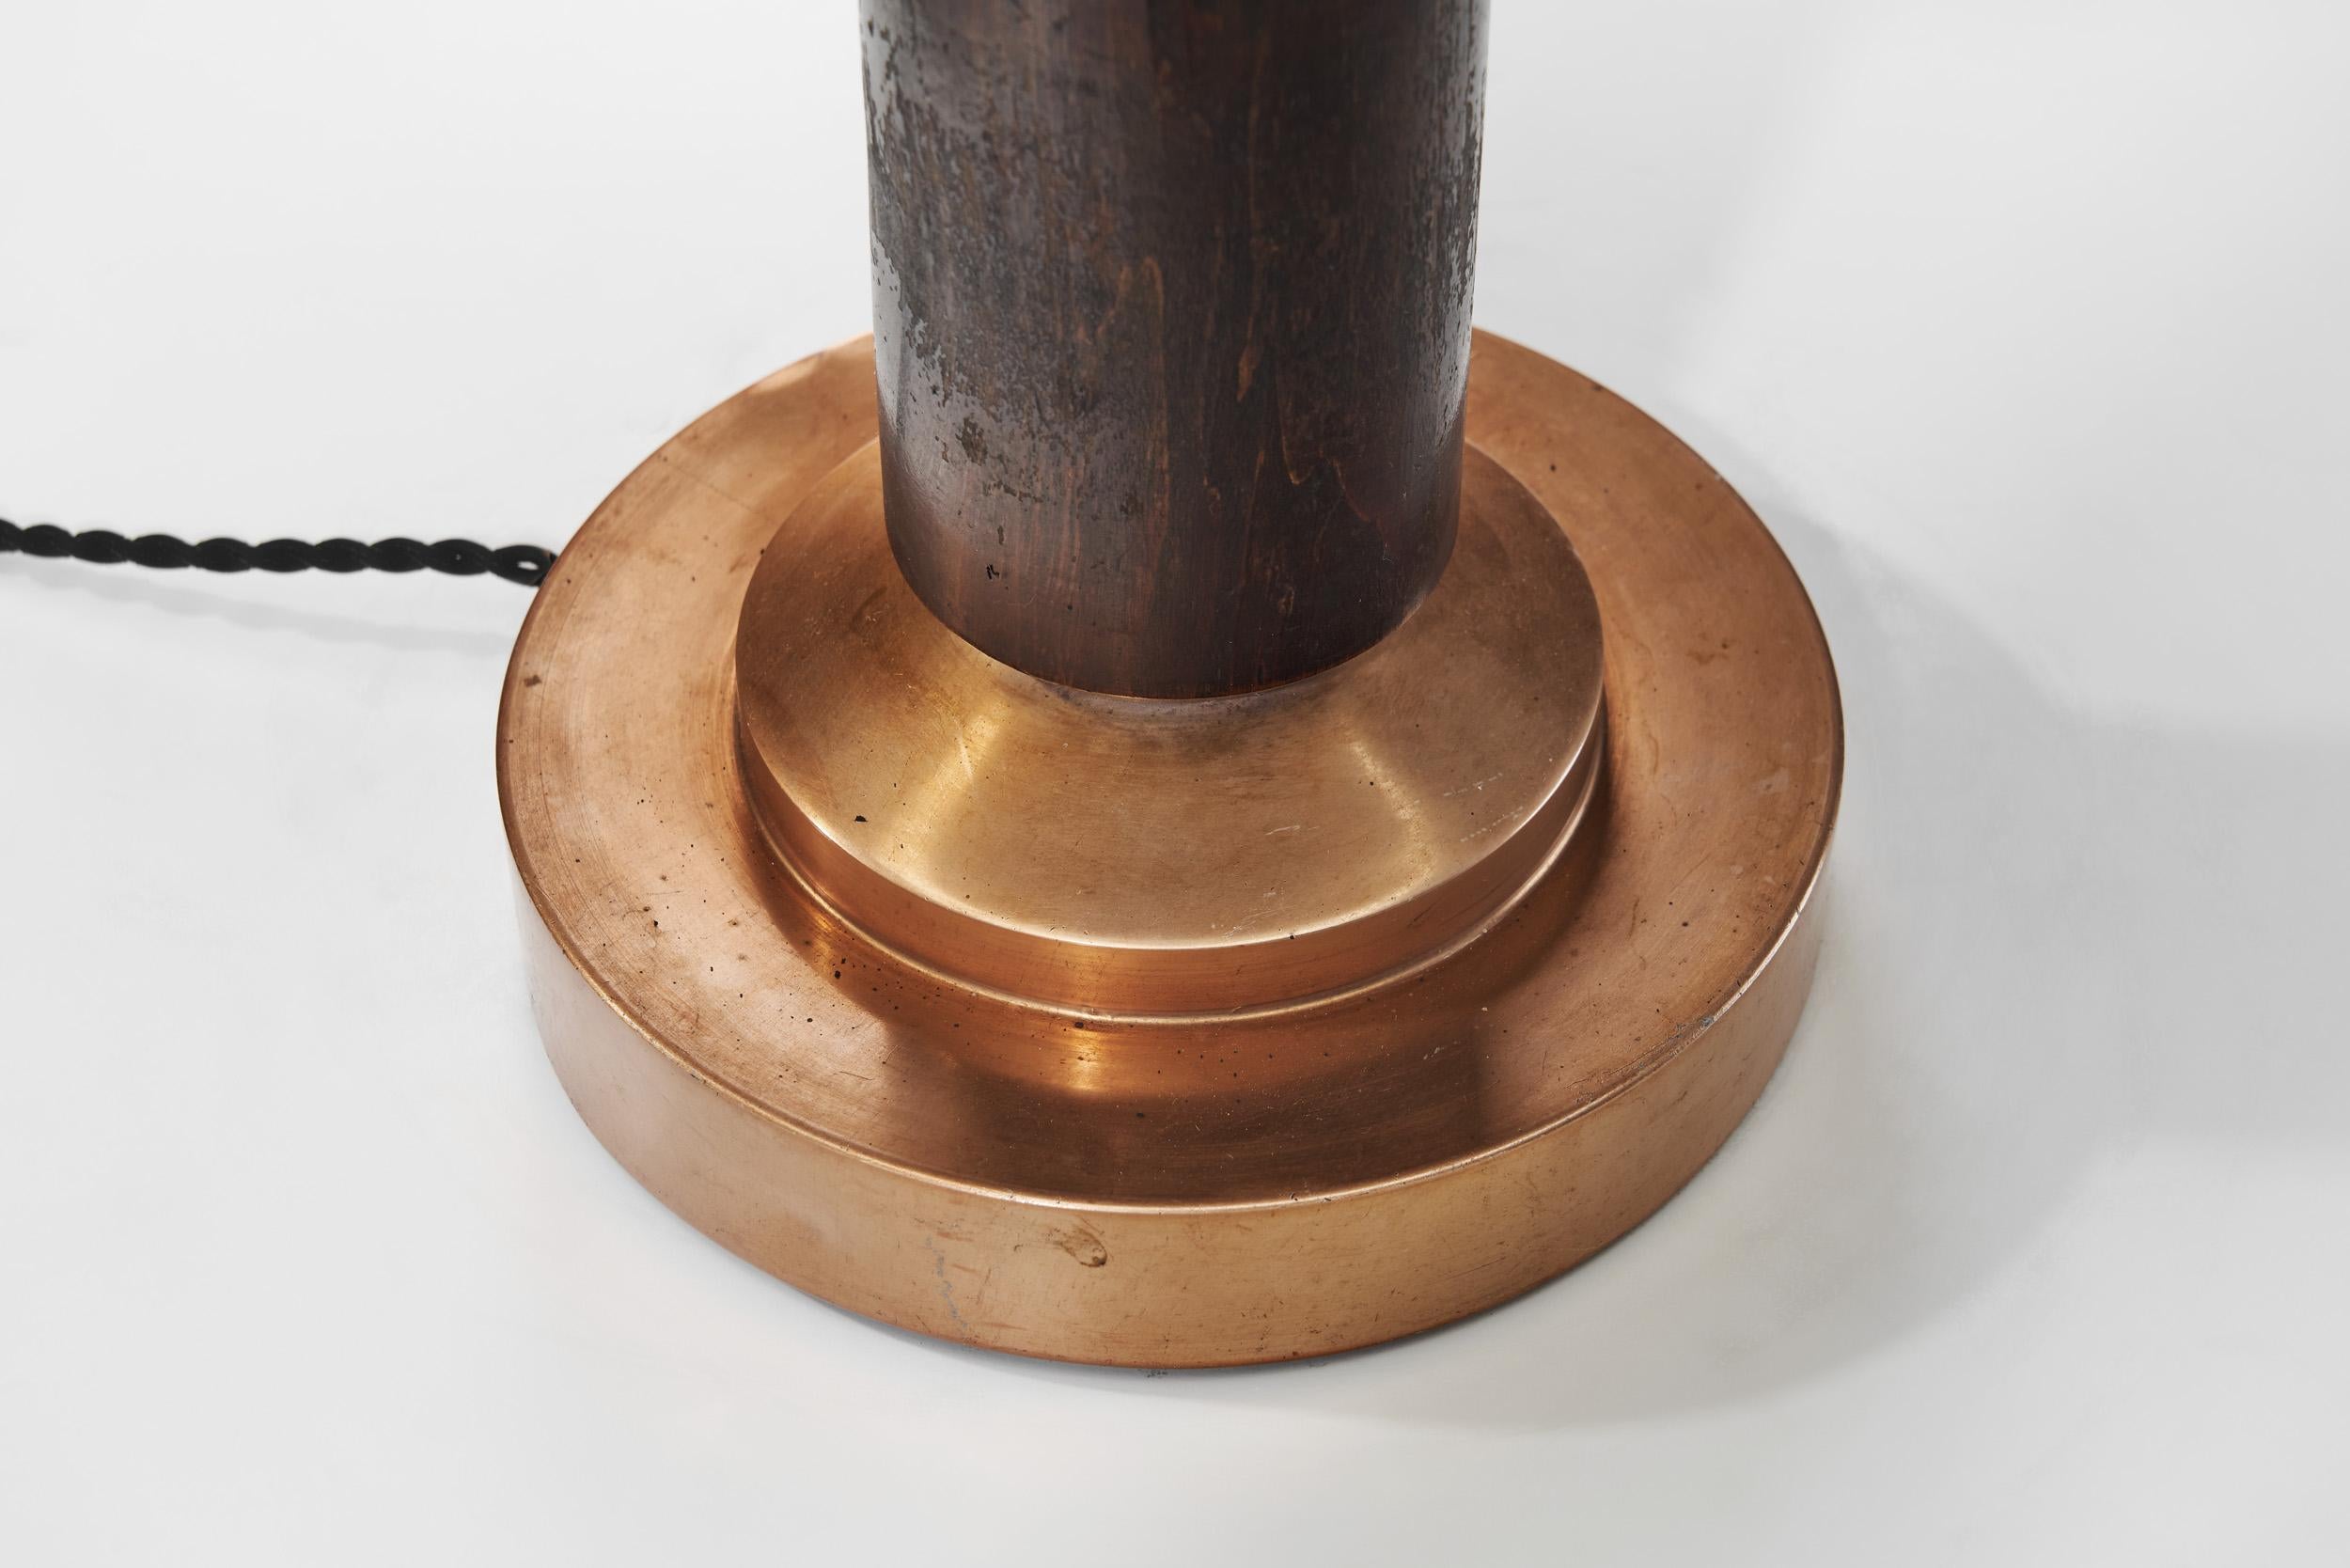 Copper and Wood Art Deco Table Lamp, Europe ca 1930s For Sale 8